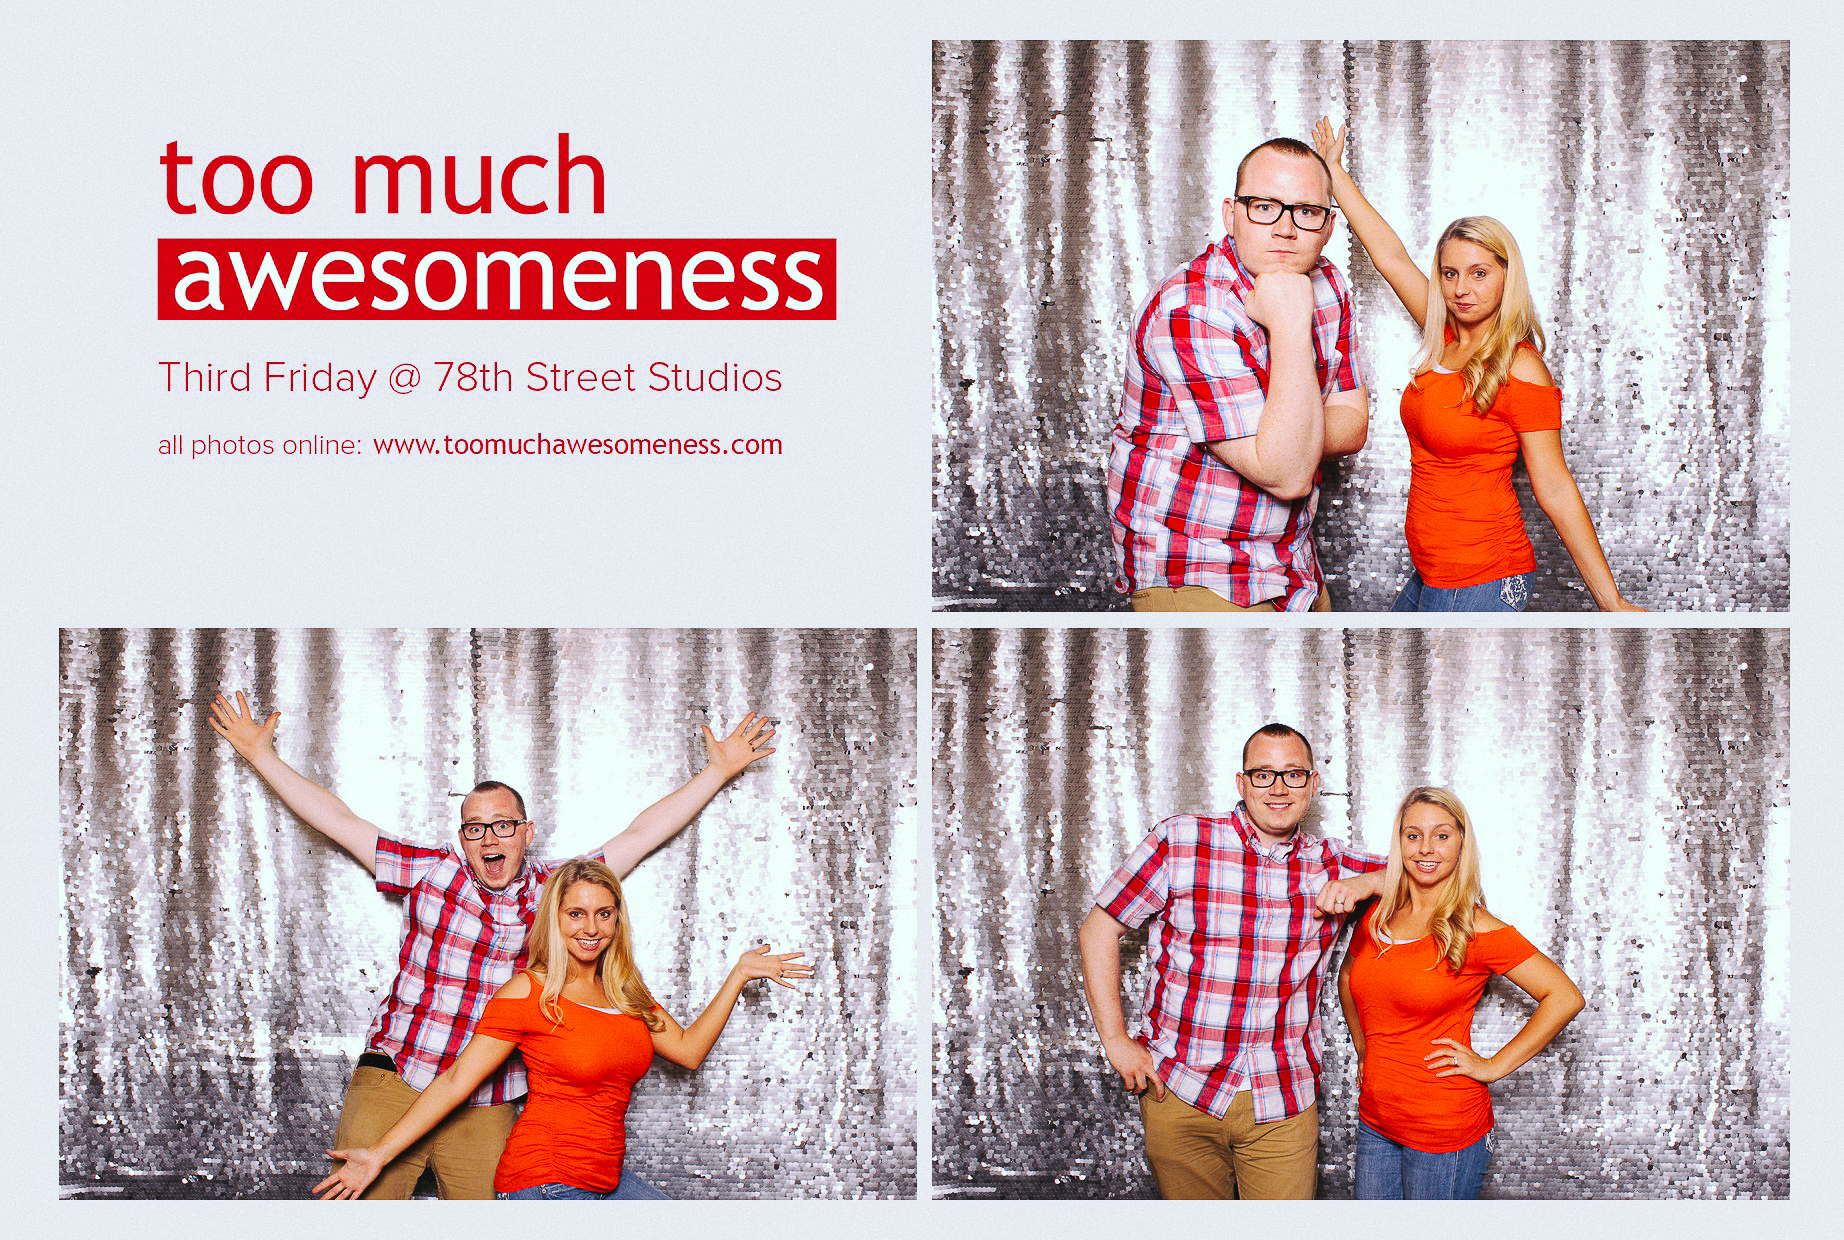 00084-78th Street Studios Third Friday Photobooth by Too Much Awesomeness-20140620.jpg